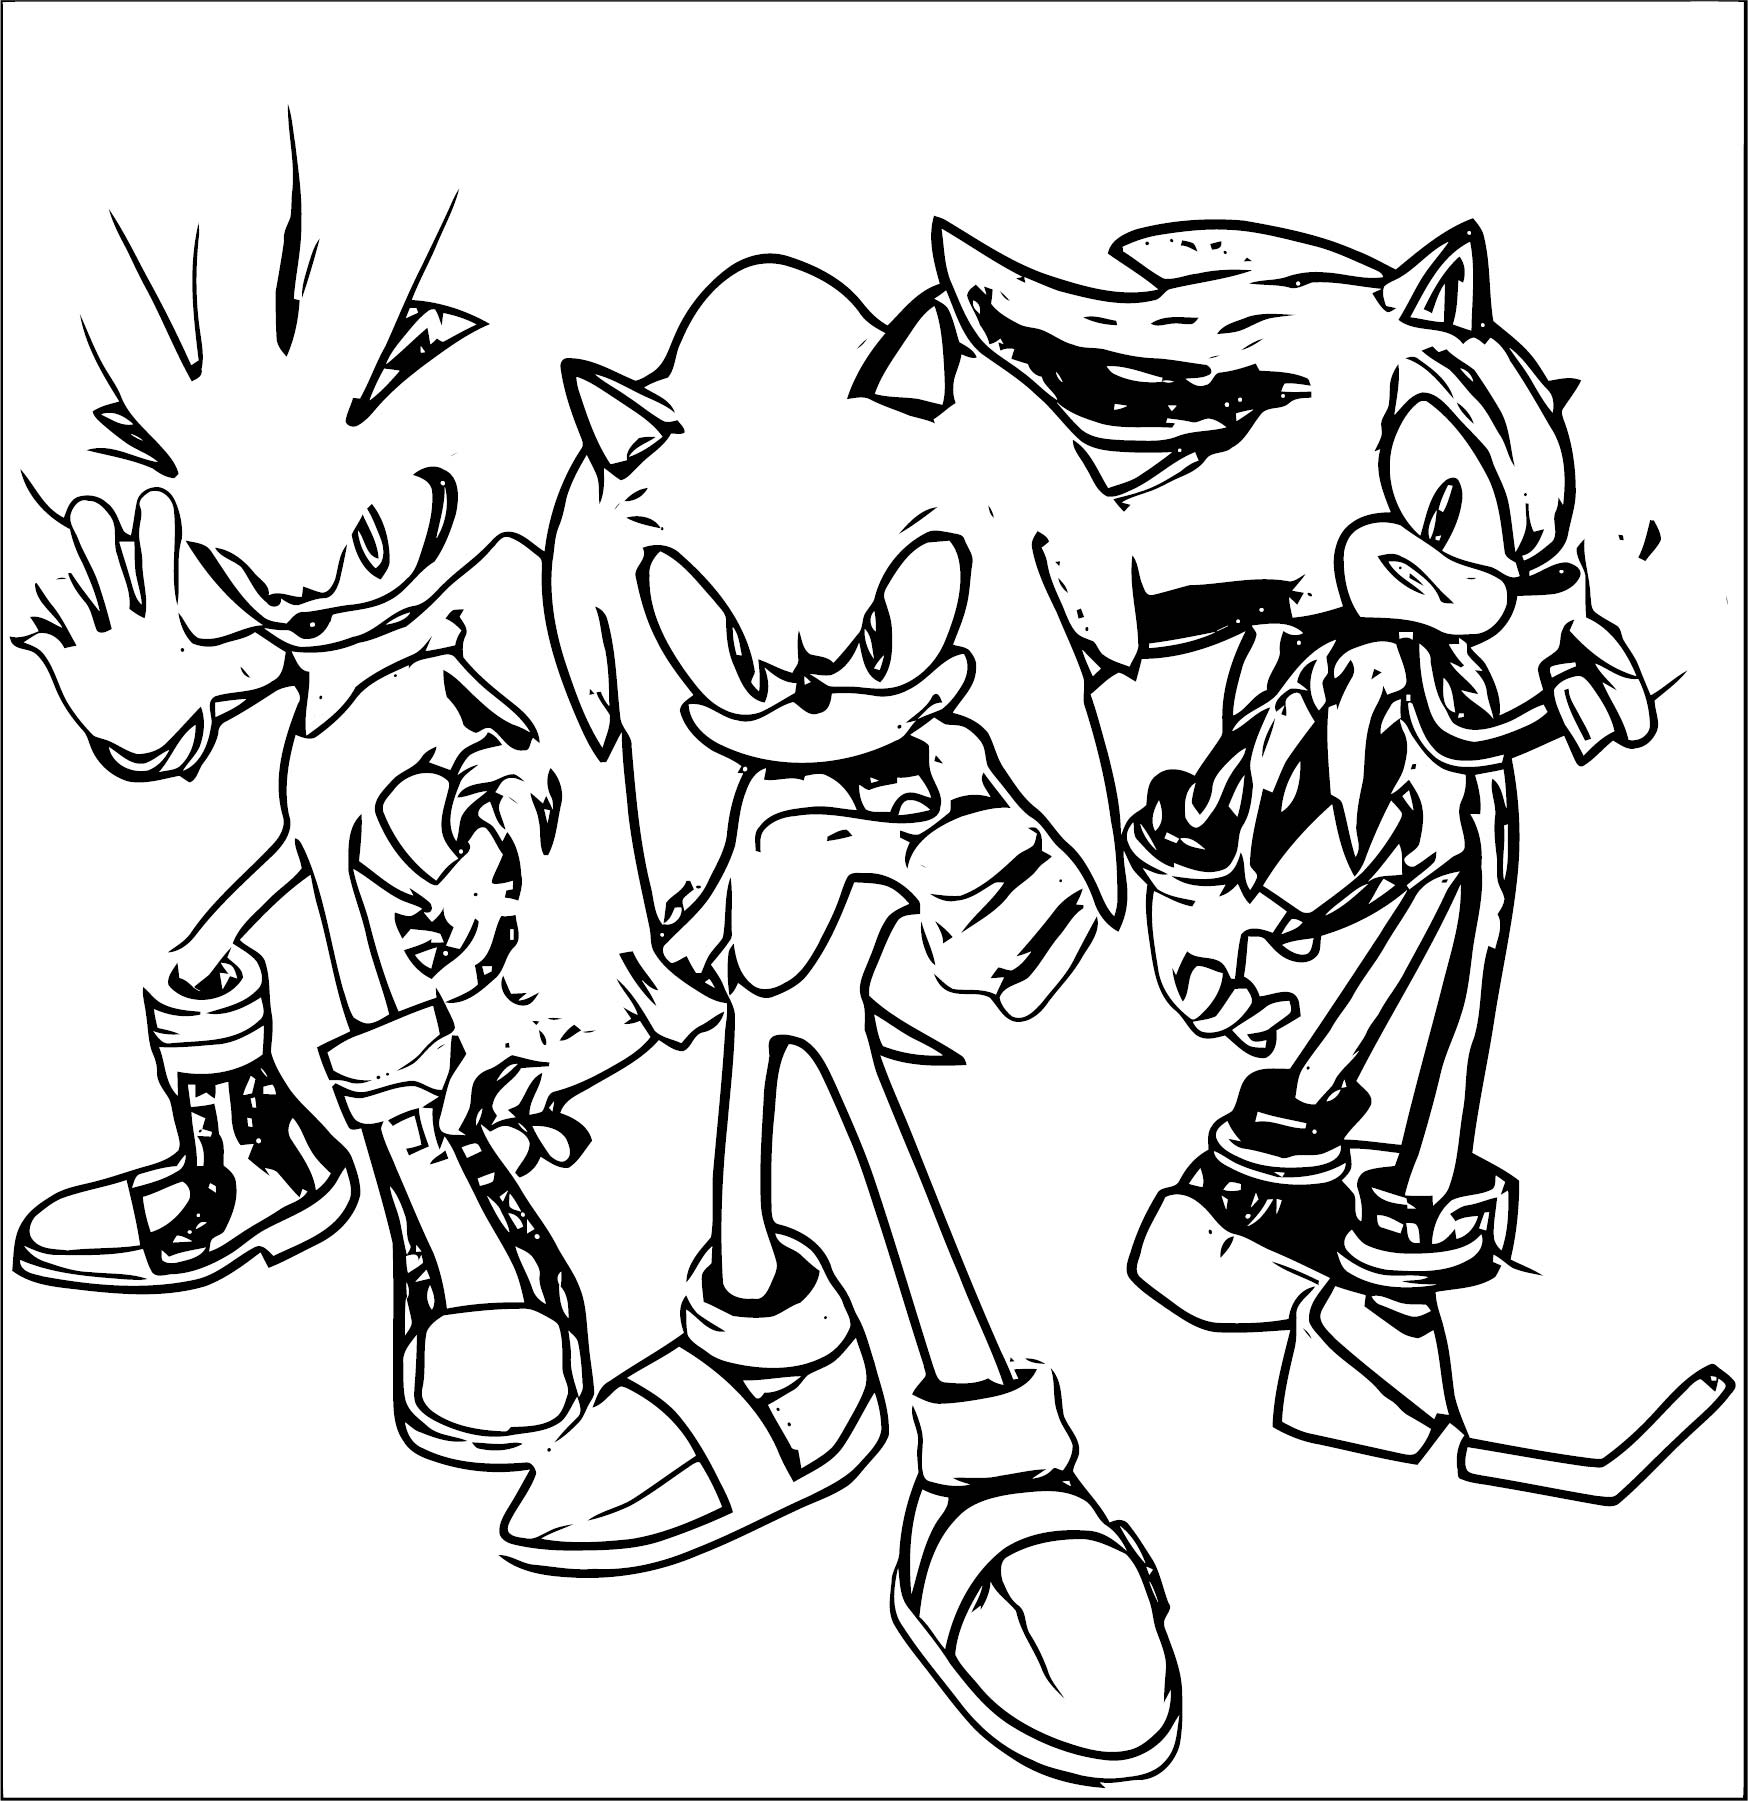 Sonic The Hedgehog Coloring Page WeColoringPage 204 – Wecoloringpage.com